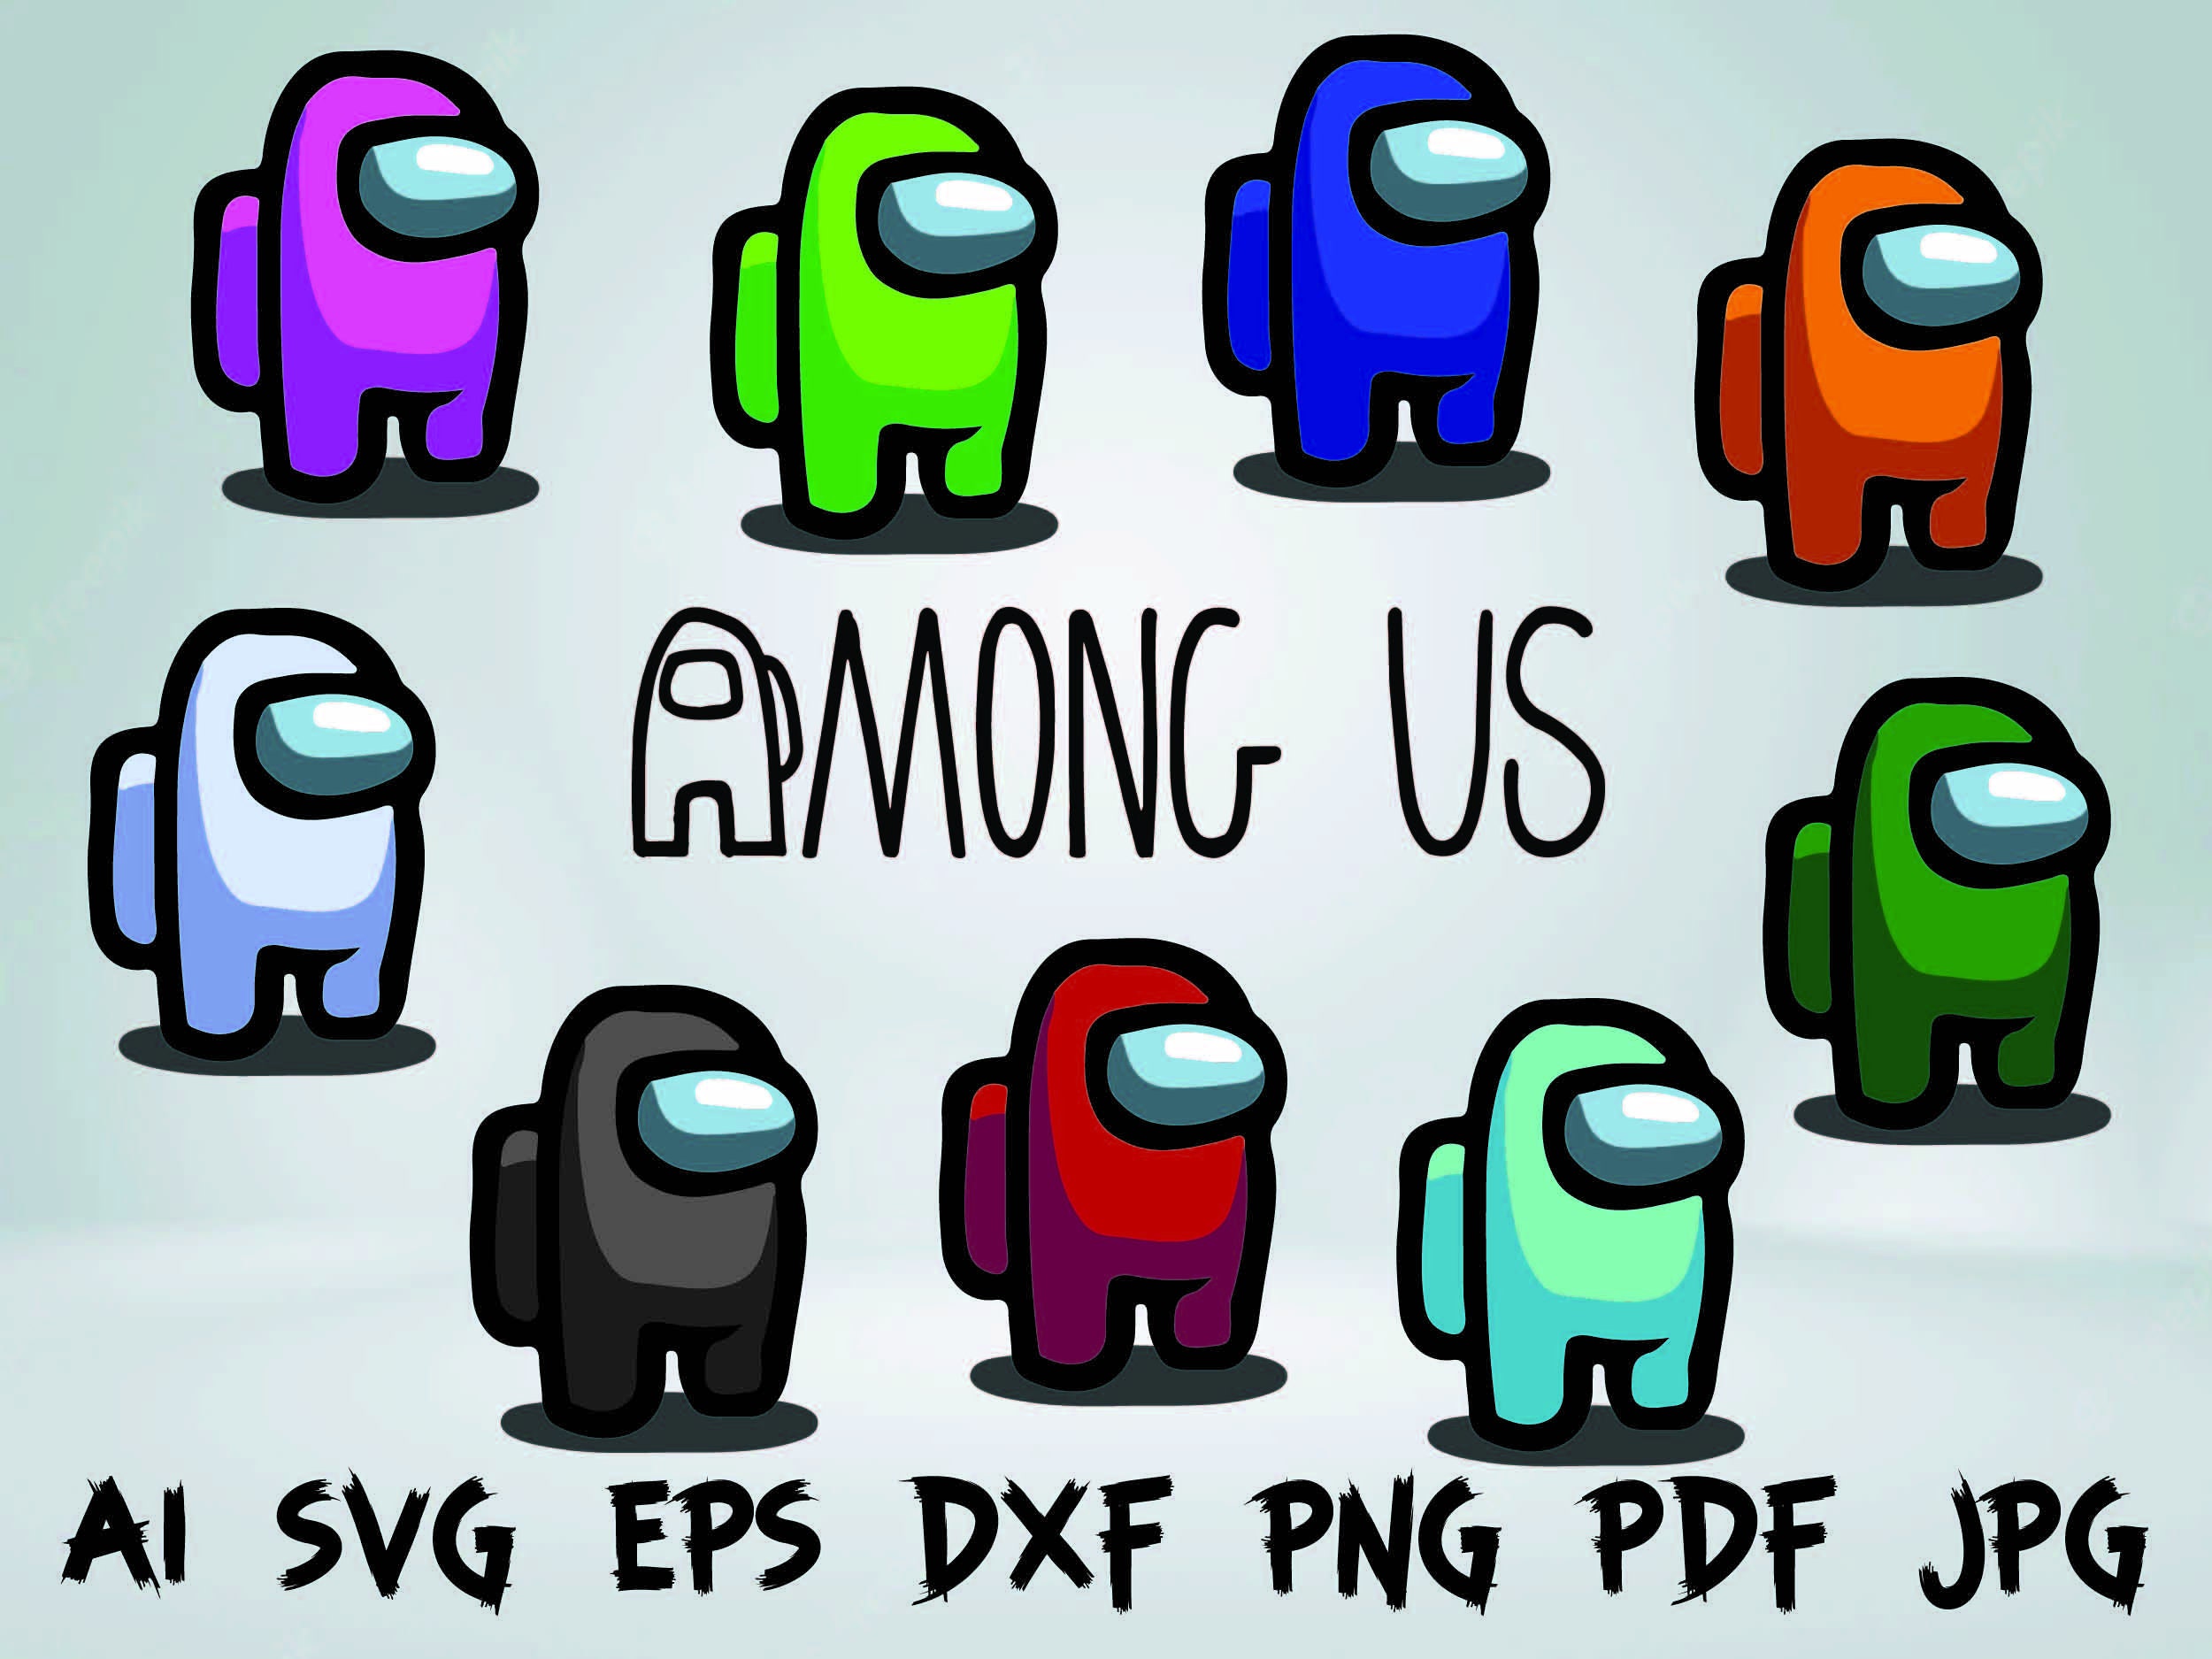 Among us is a collection colored characters Vector Image